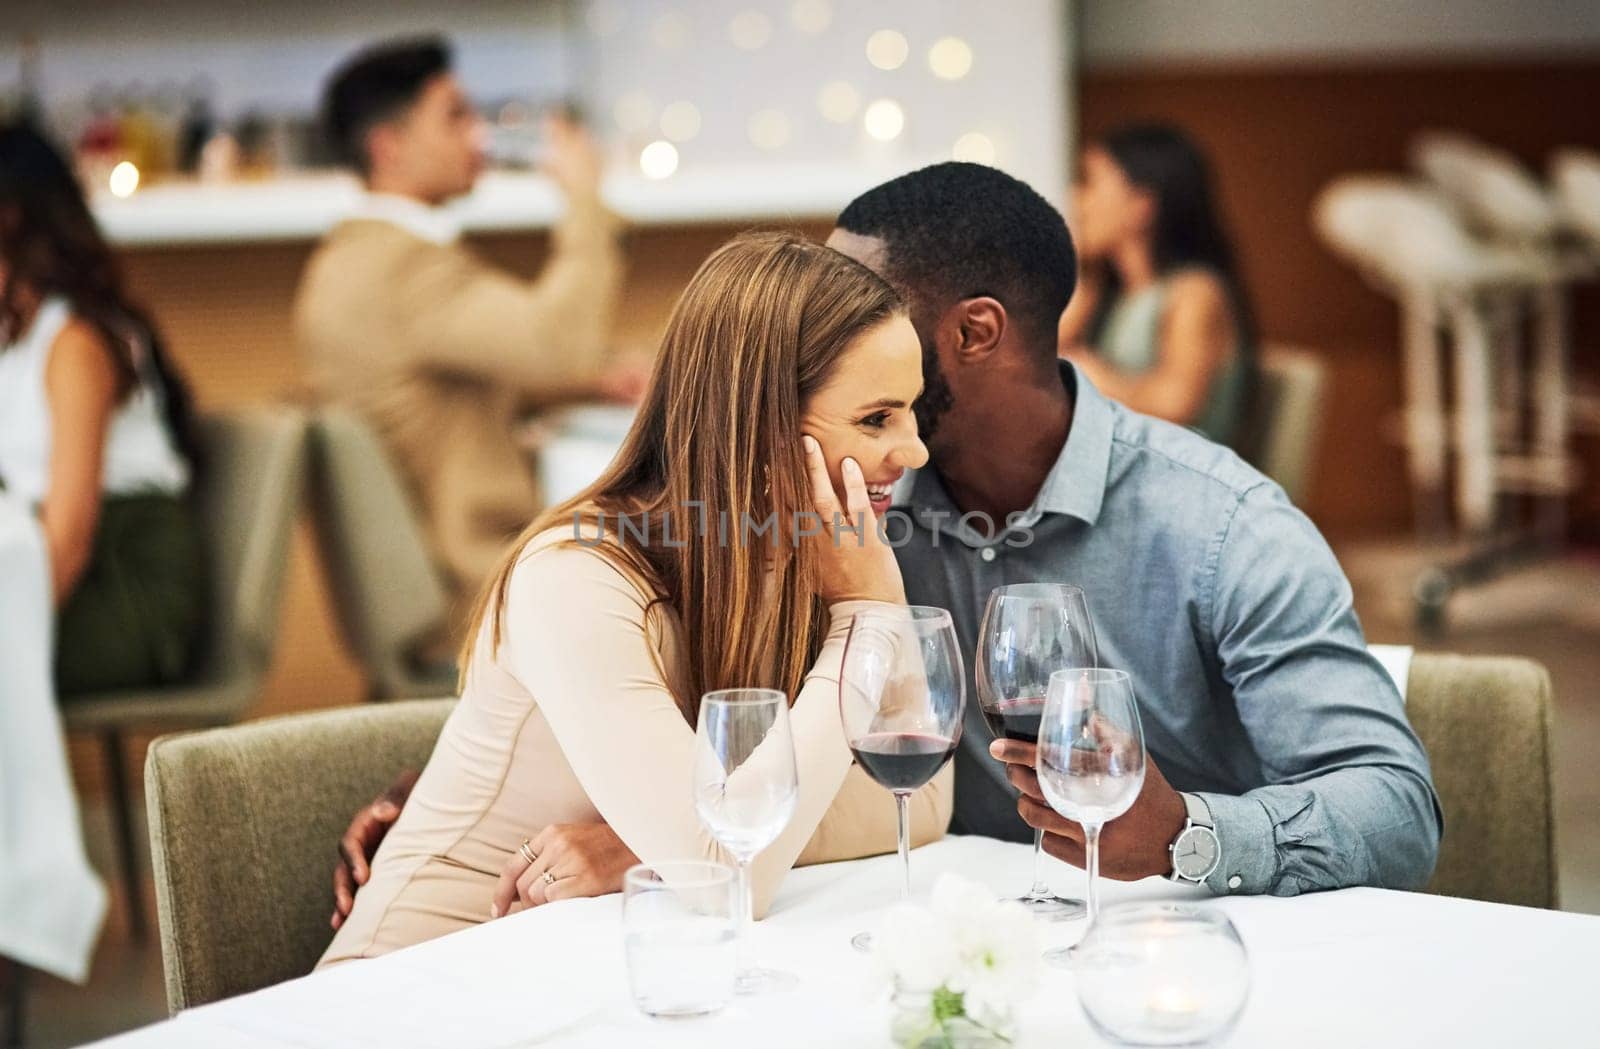 Love, man whisper with woman and in restaurant with wine glasses, happiness or cheerful on Valentines day. Romance, couple or flirty for quality time, romantic or conversation with fine dining or joy by YuriArcurs